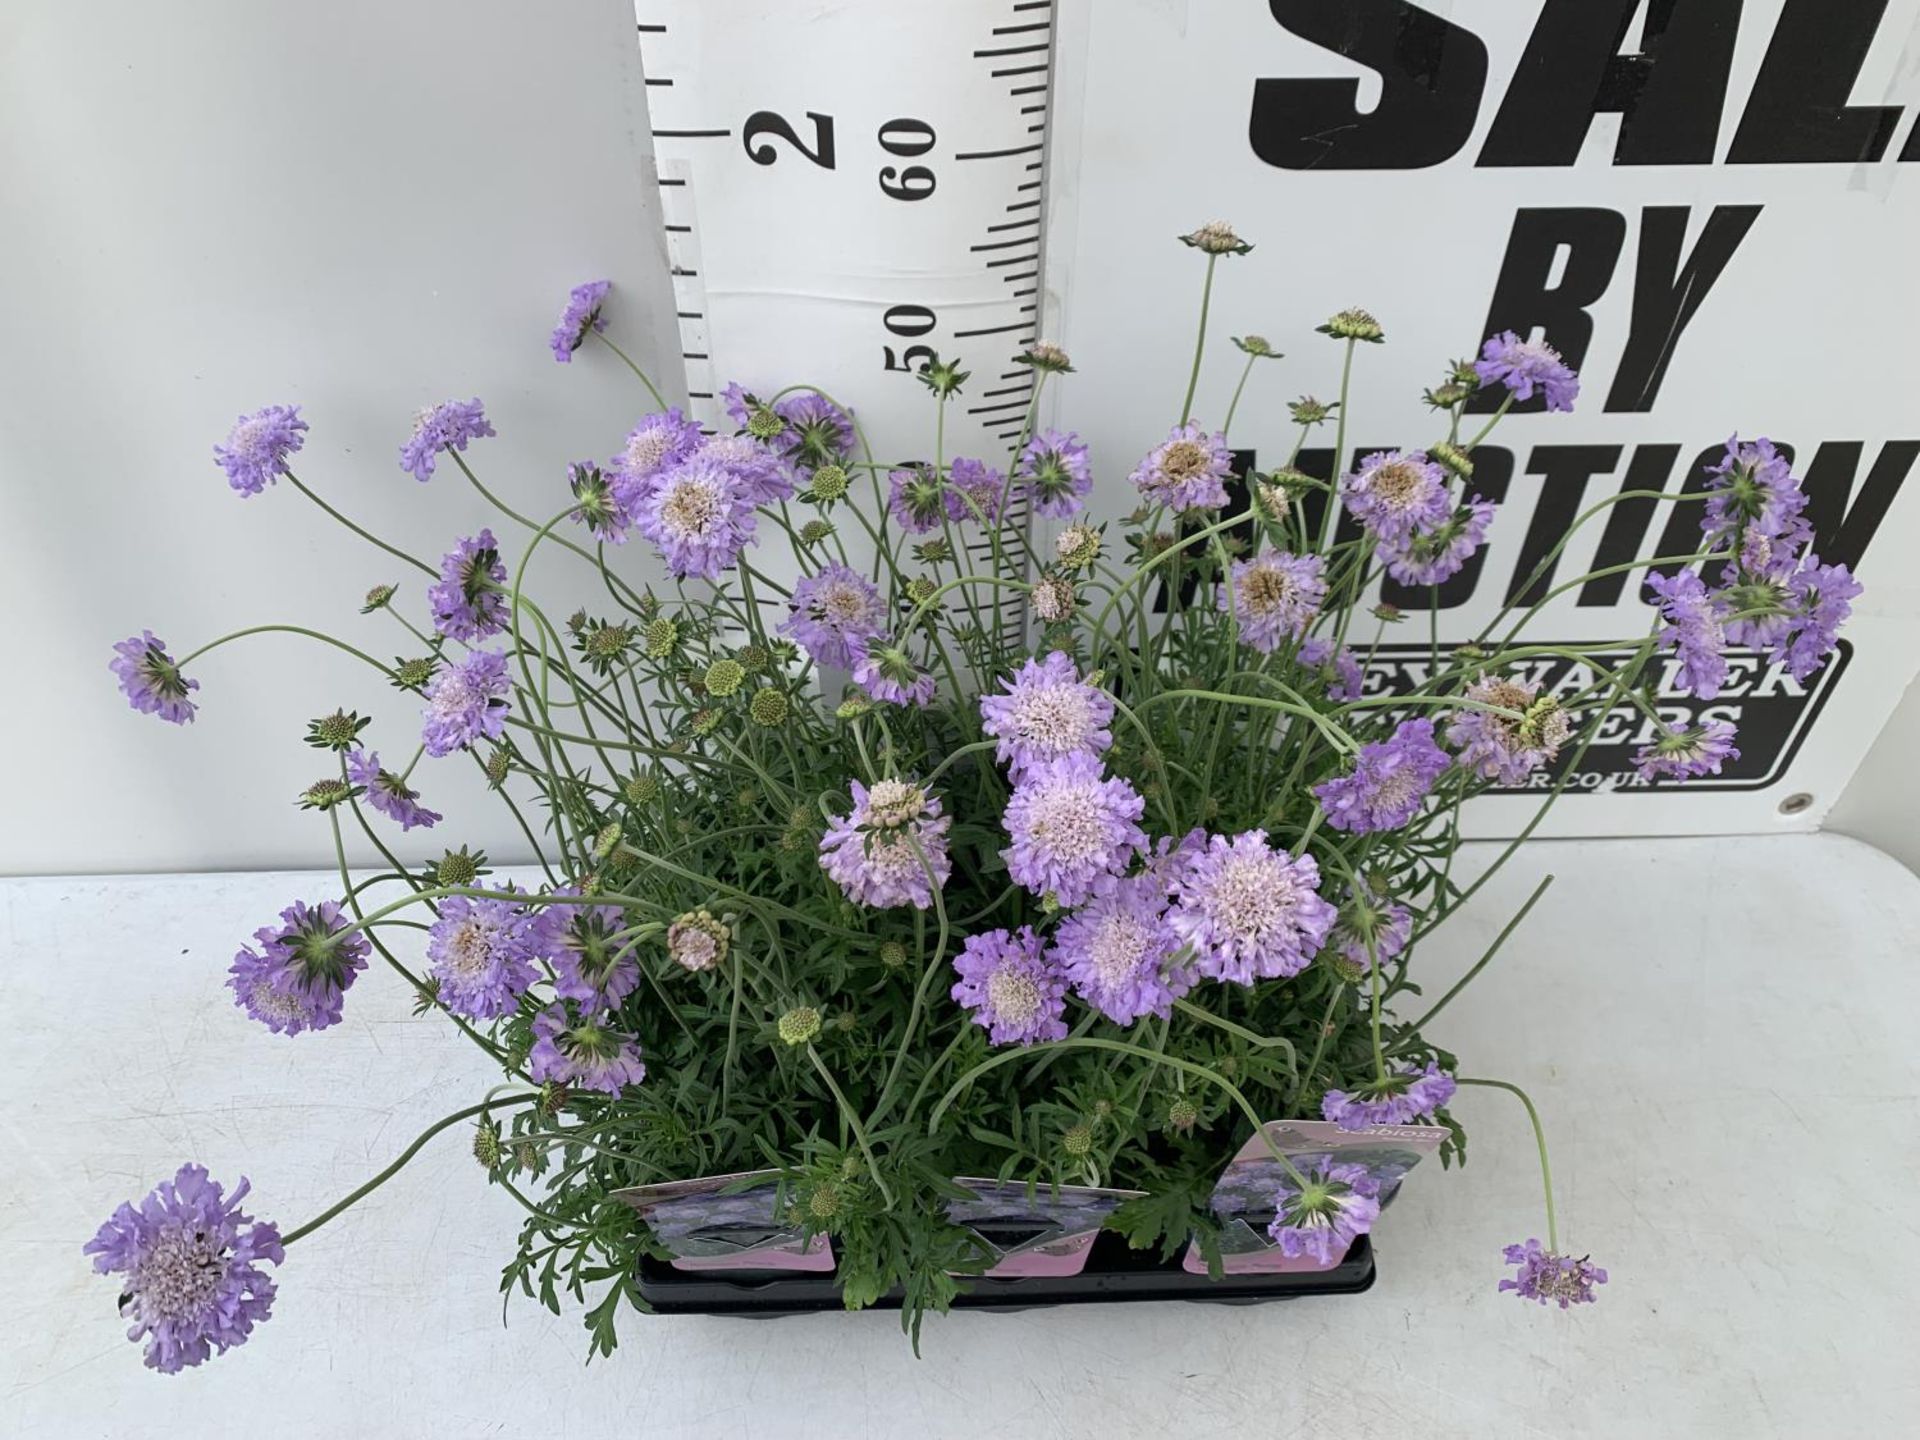 SIX SCABIOSA BUTTERFLY BLUE IN 2 LTR POTS 50-60CM TALL TO BE SOLD FOR THE SIX PLUS VAT - Image 2 of 4